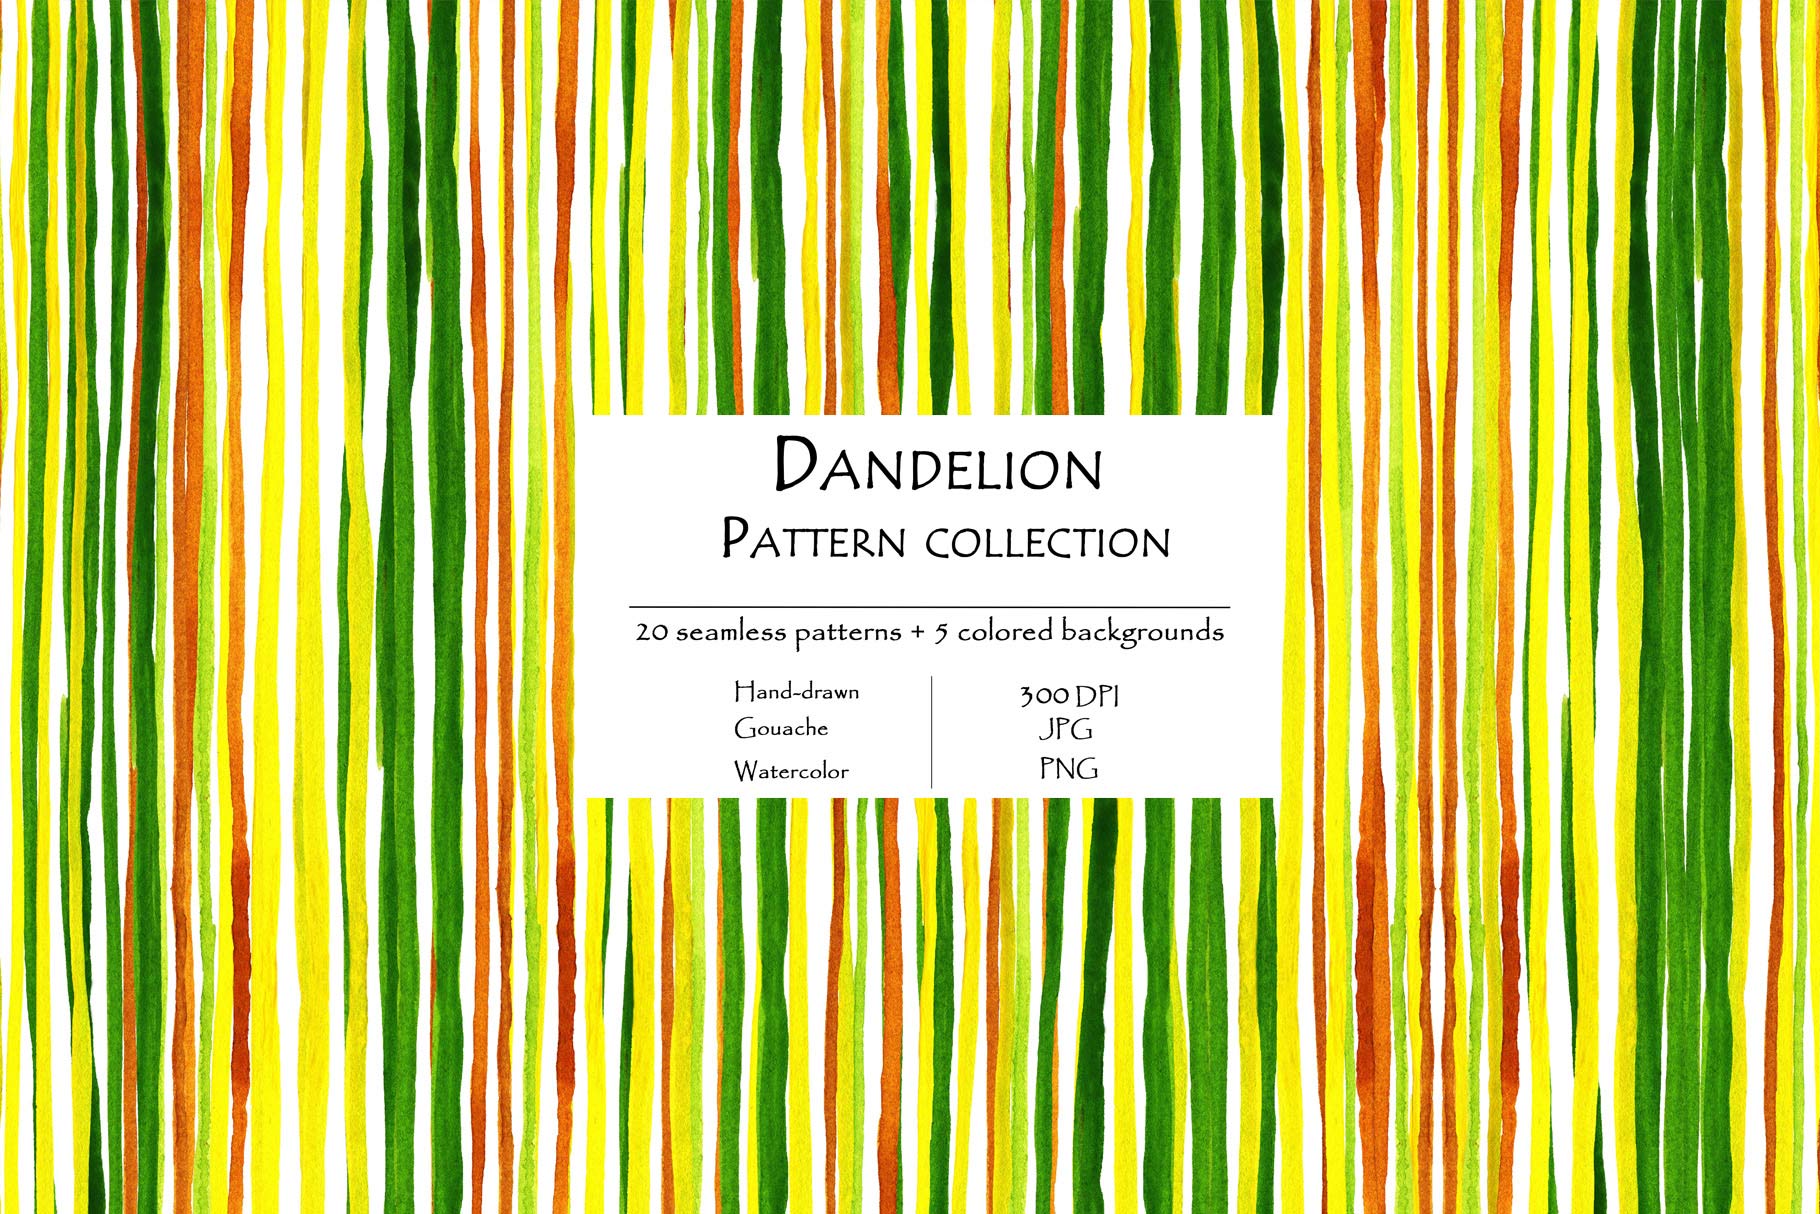 Dandelion Pattern Collection Of 20 Seamless Patterns And 5 Colored Background Stripes.